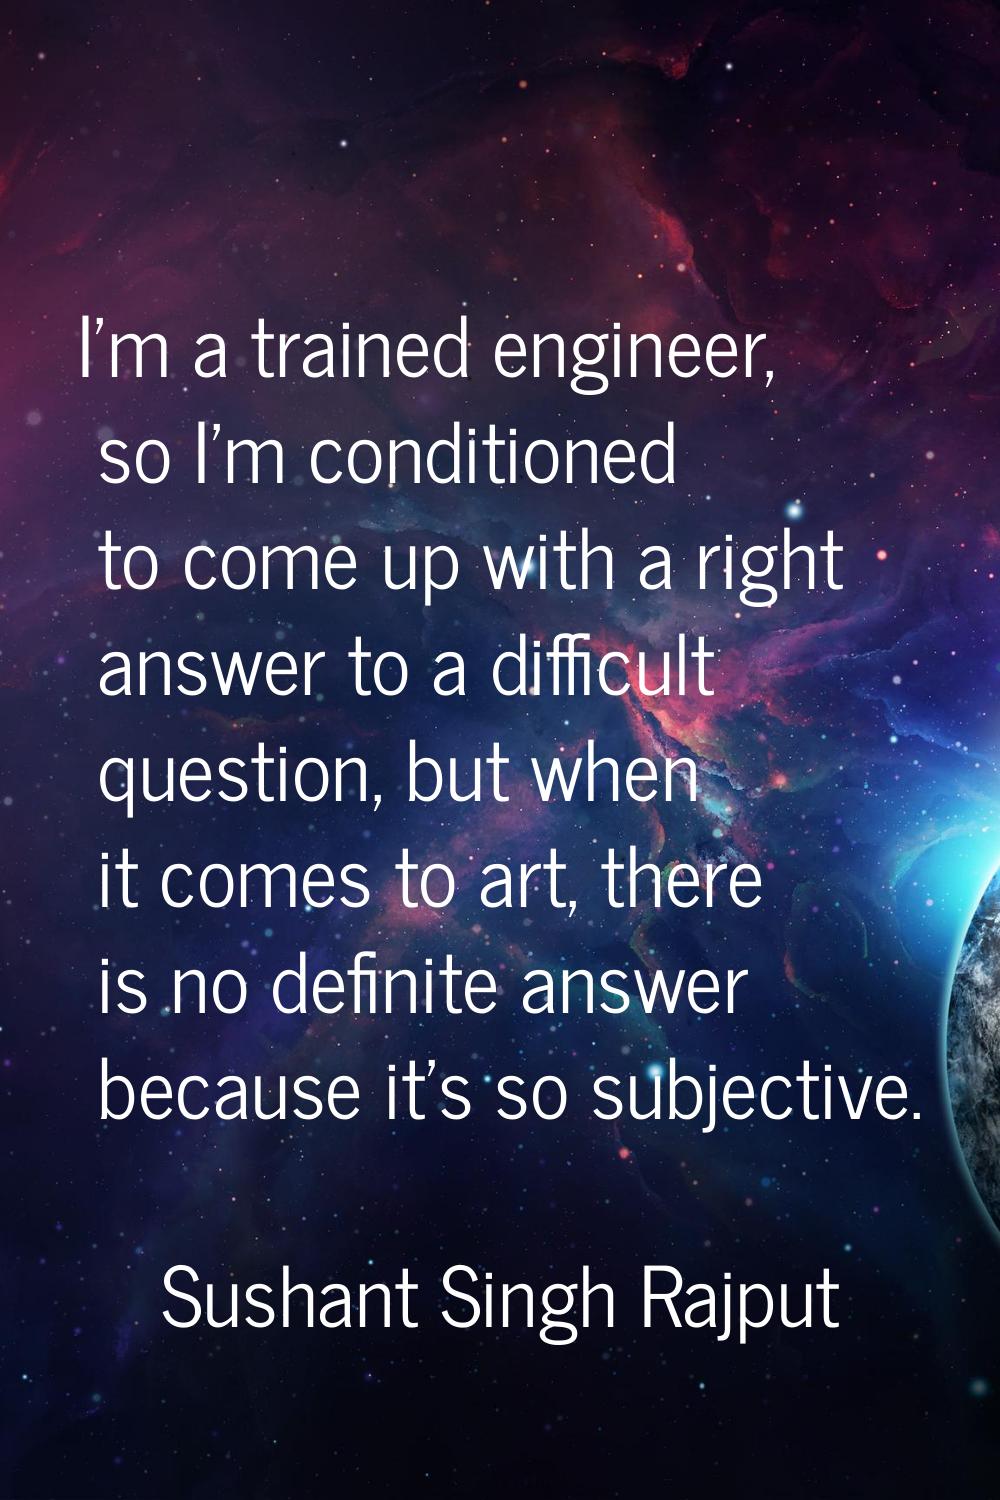 I'm a trained engineer, so I'm conditioned to come up with a right answer to a difficult question, 